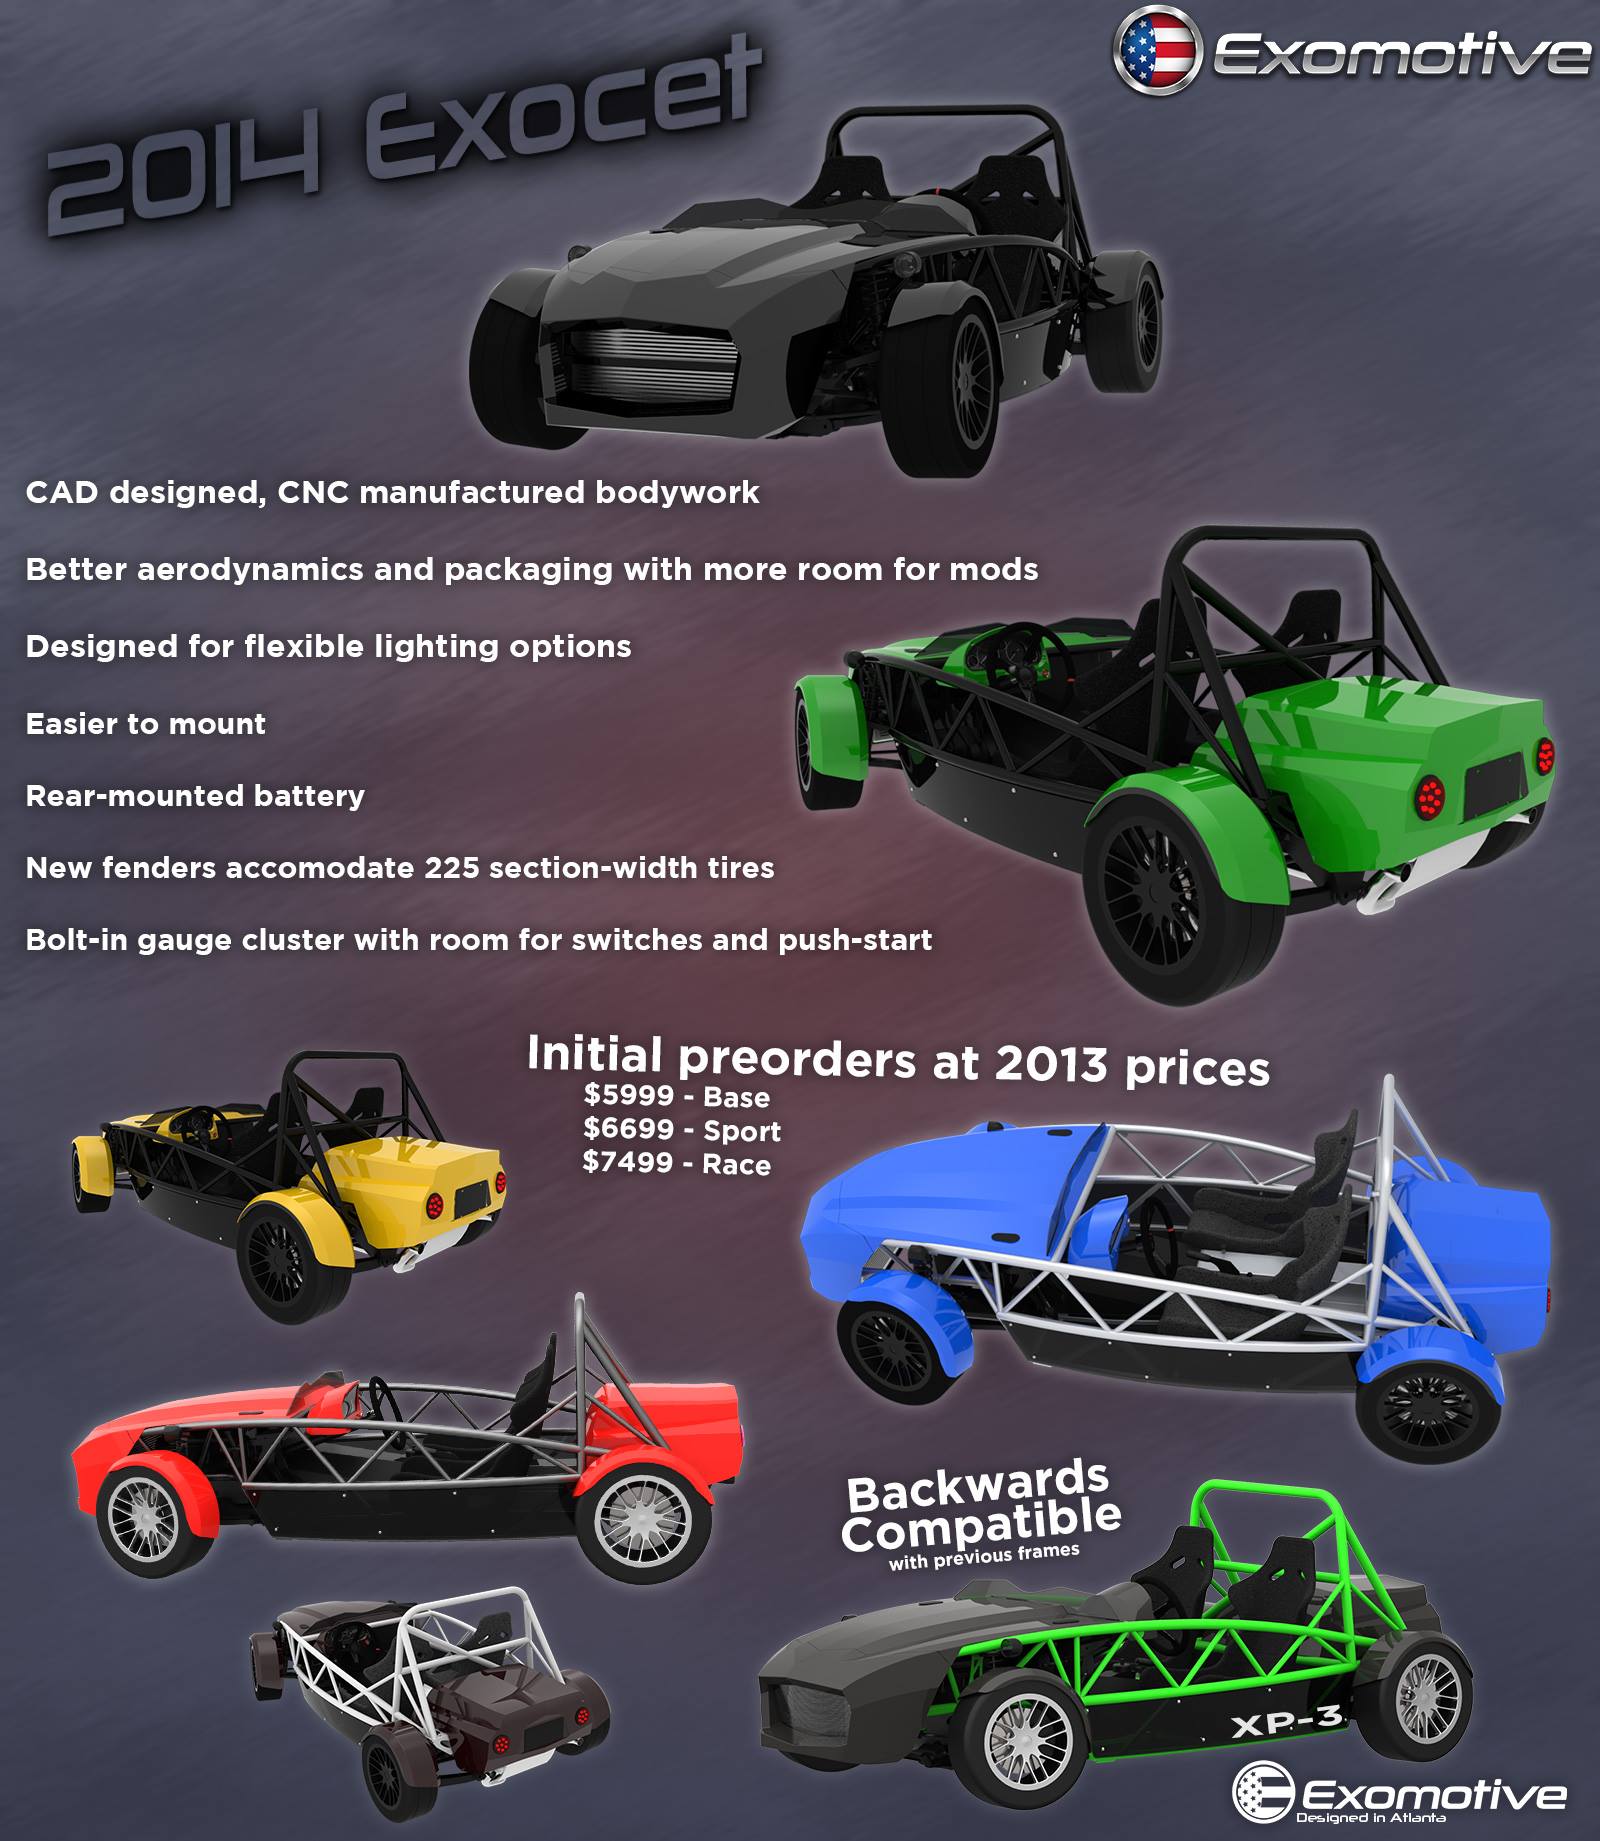 Introducing…the new Exocet!